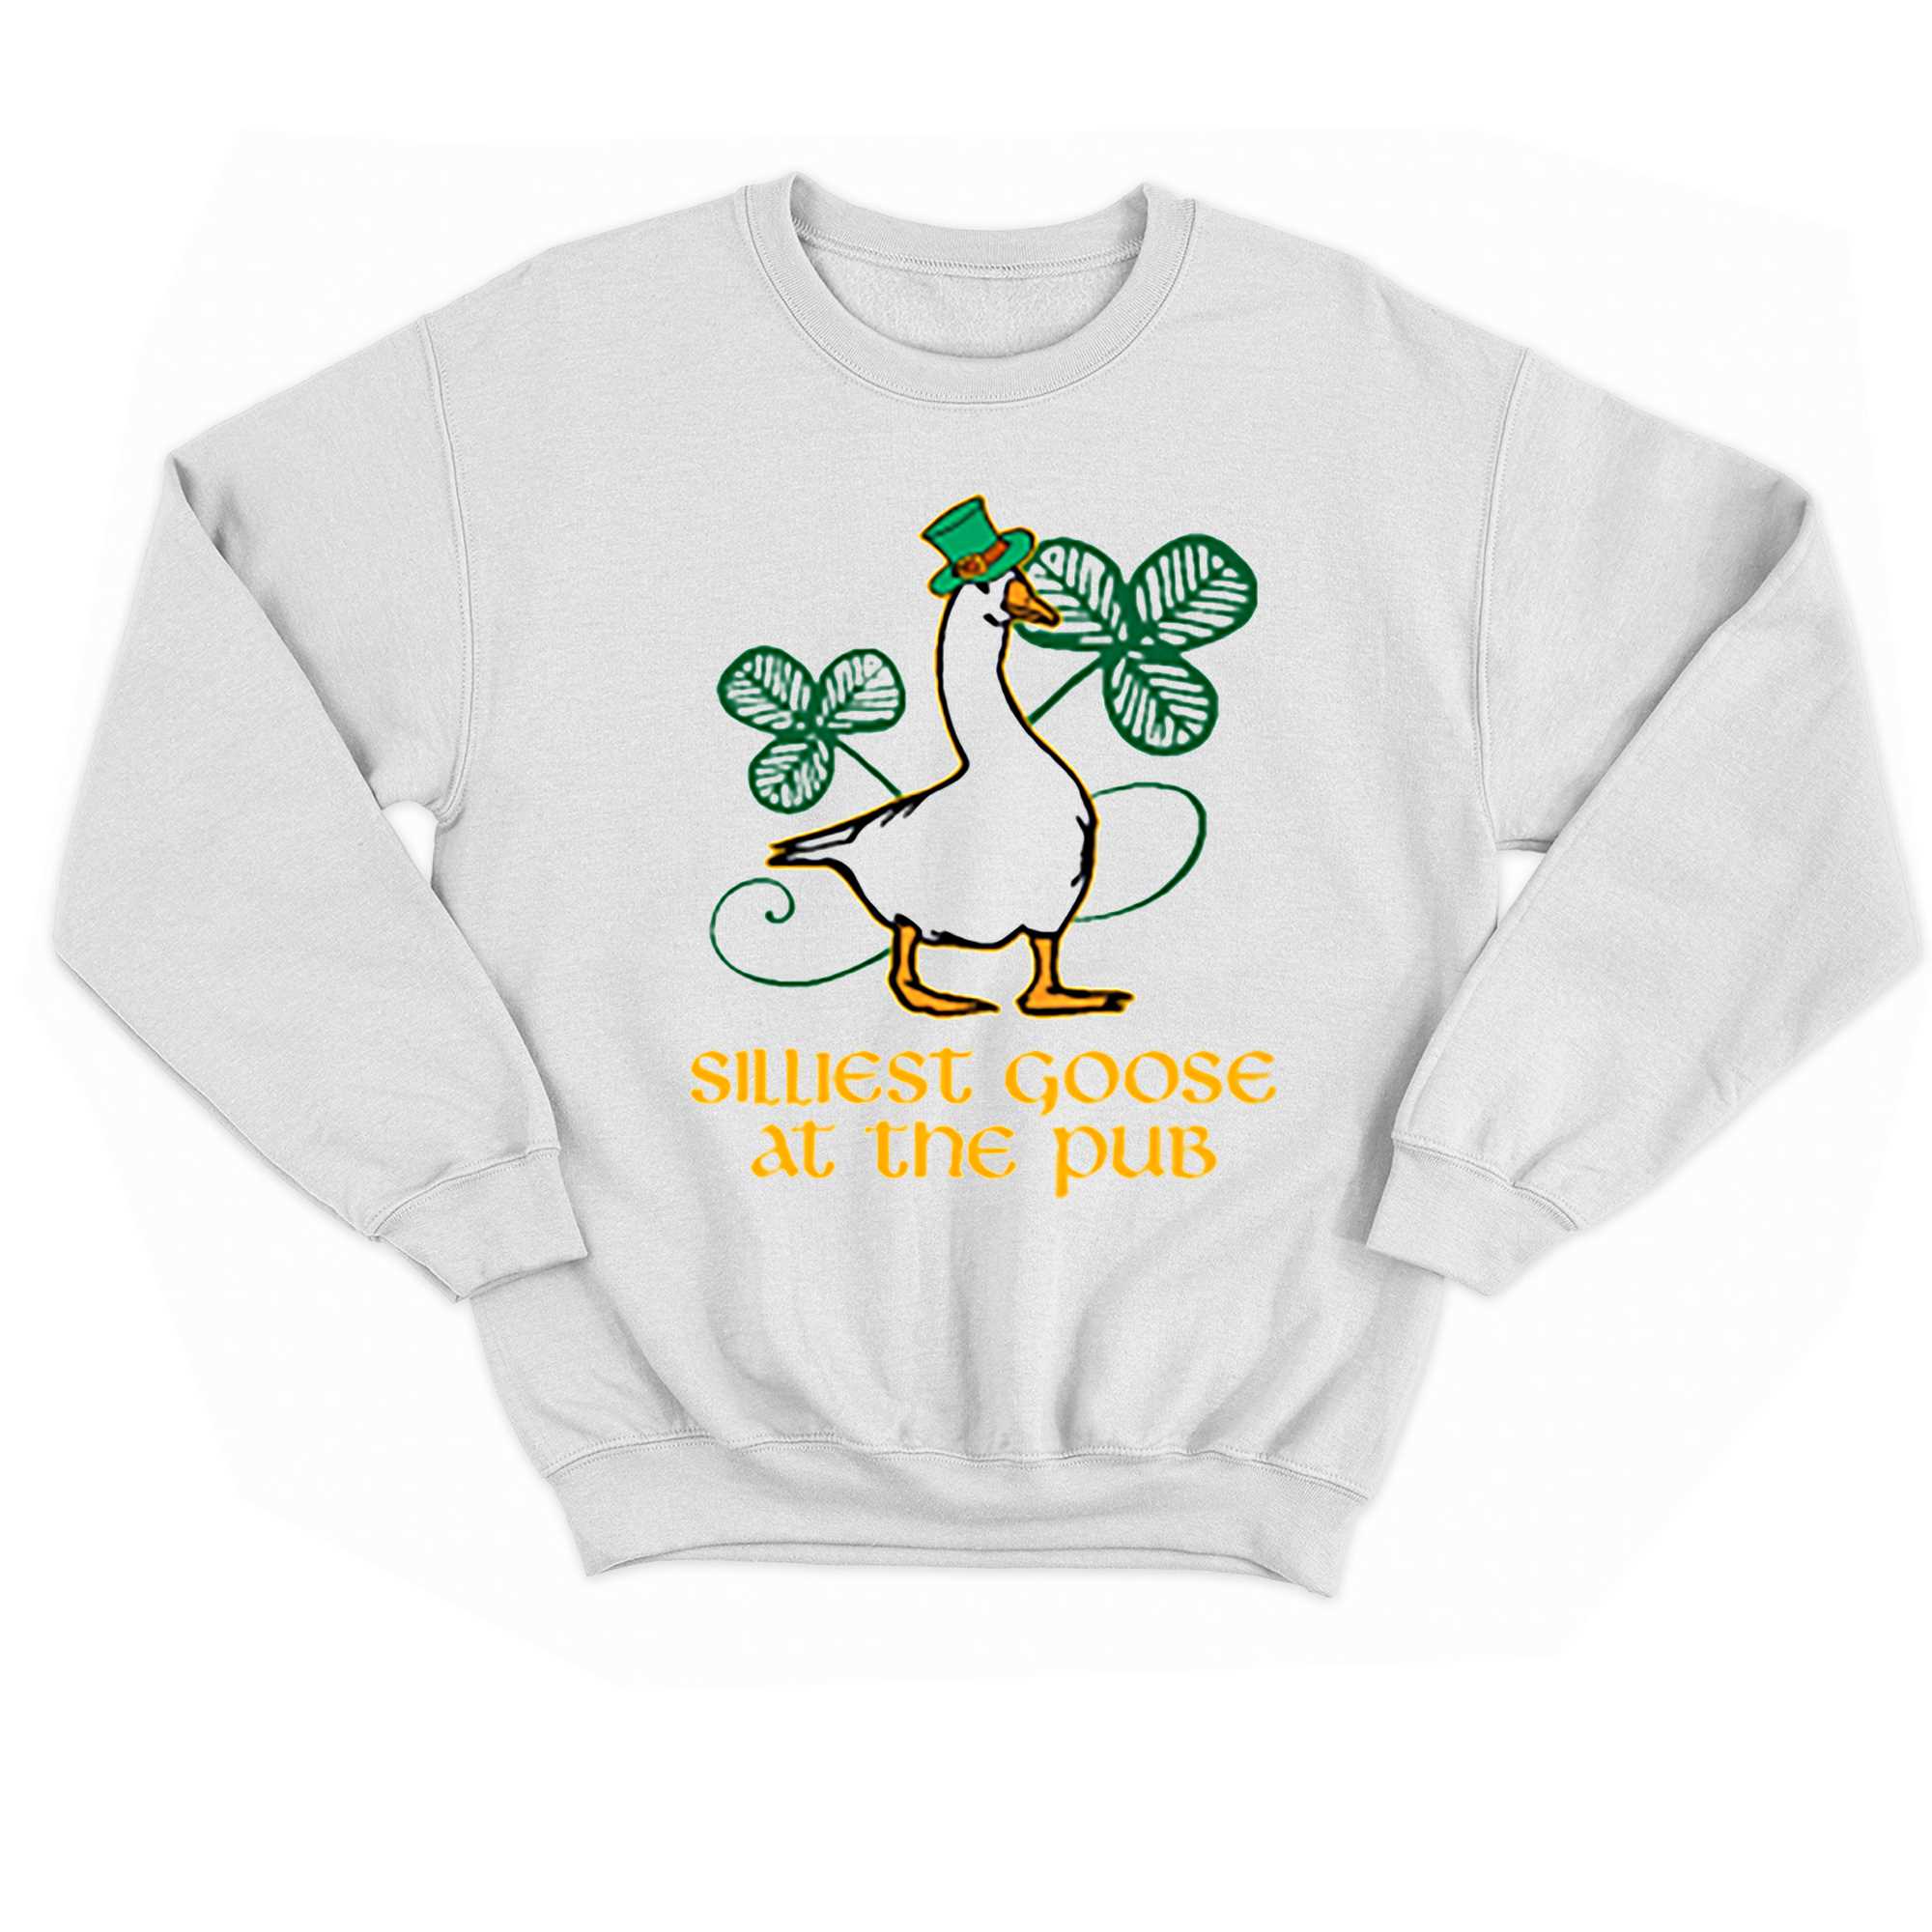 Silliest Goose At The Pub T-shirt 